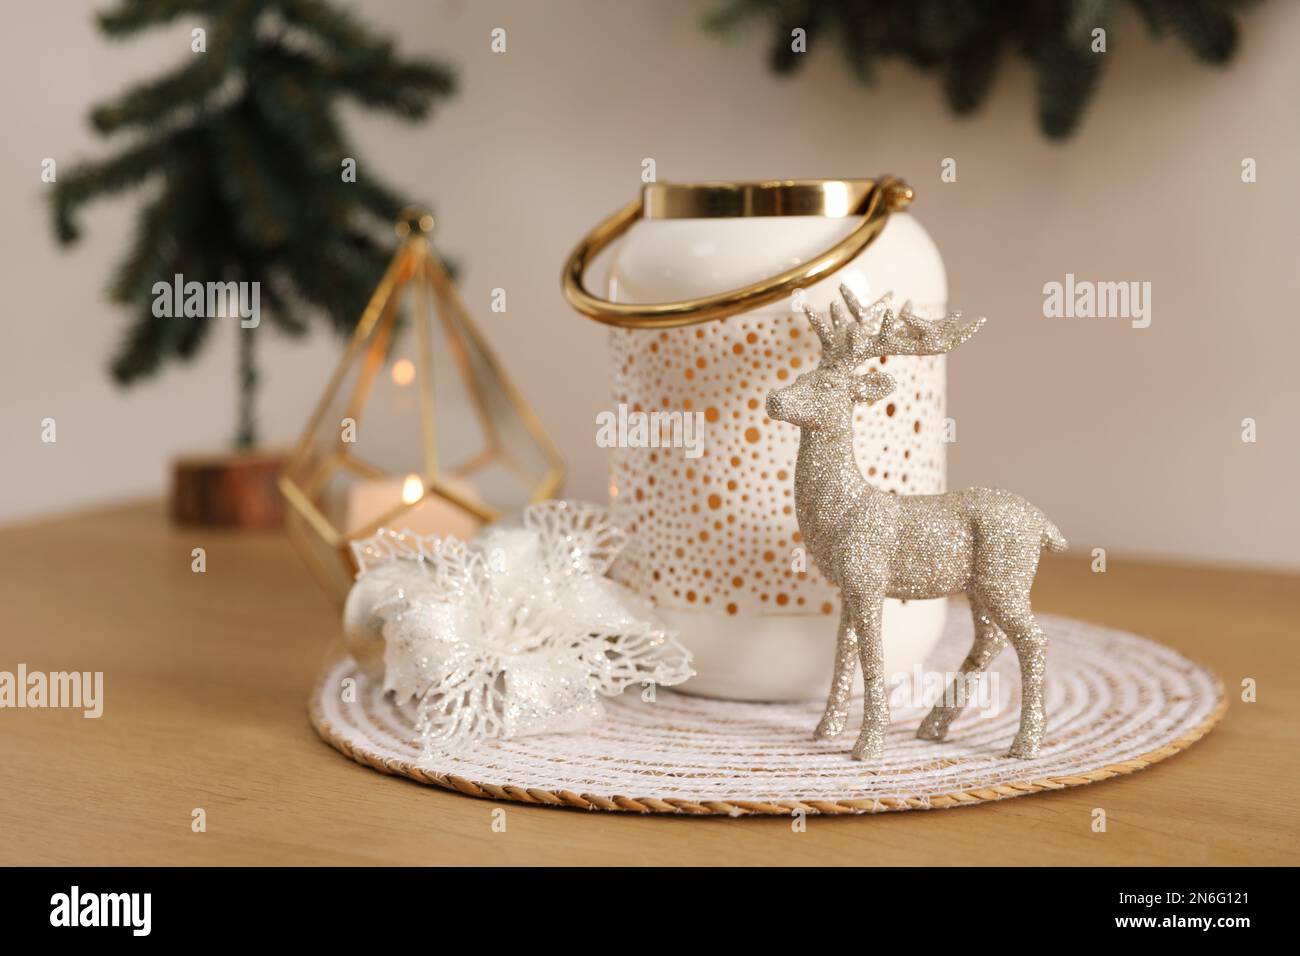 Small shiny deer, decorative flower and candle holder on wooden table. Interior design Stock Photo